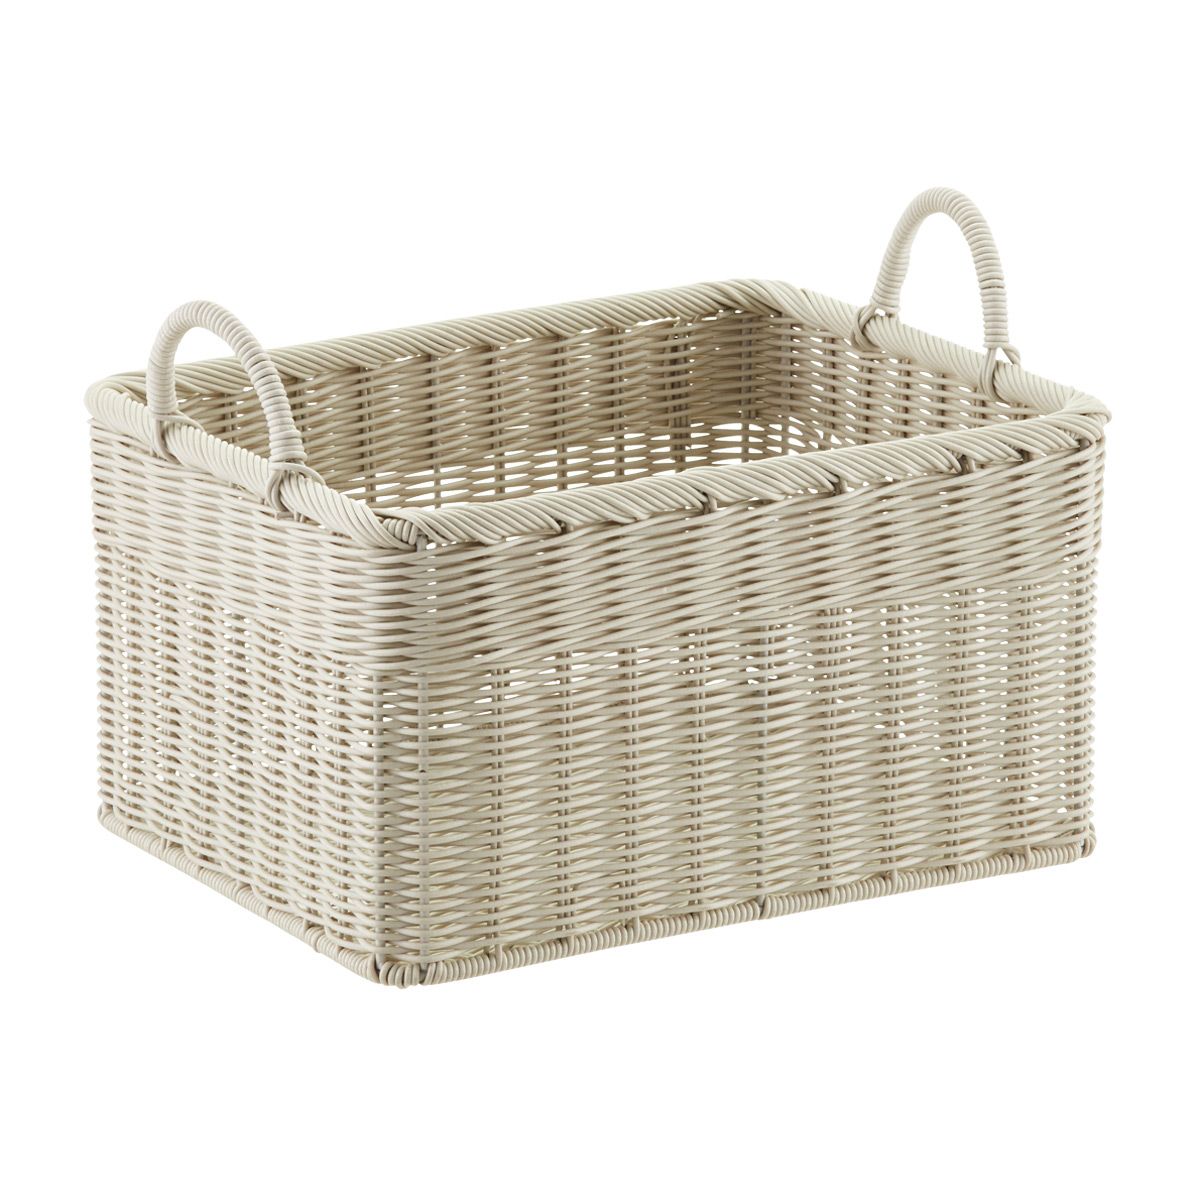 Stone Woven Plastic Storage Bins with Handles | The Container Store